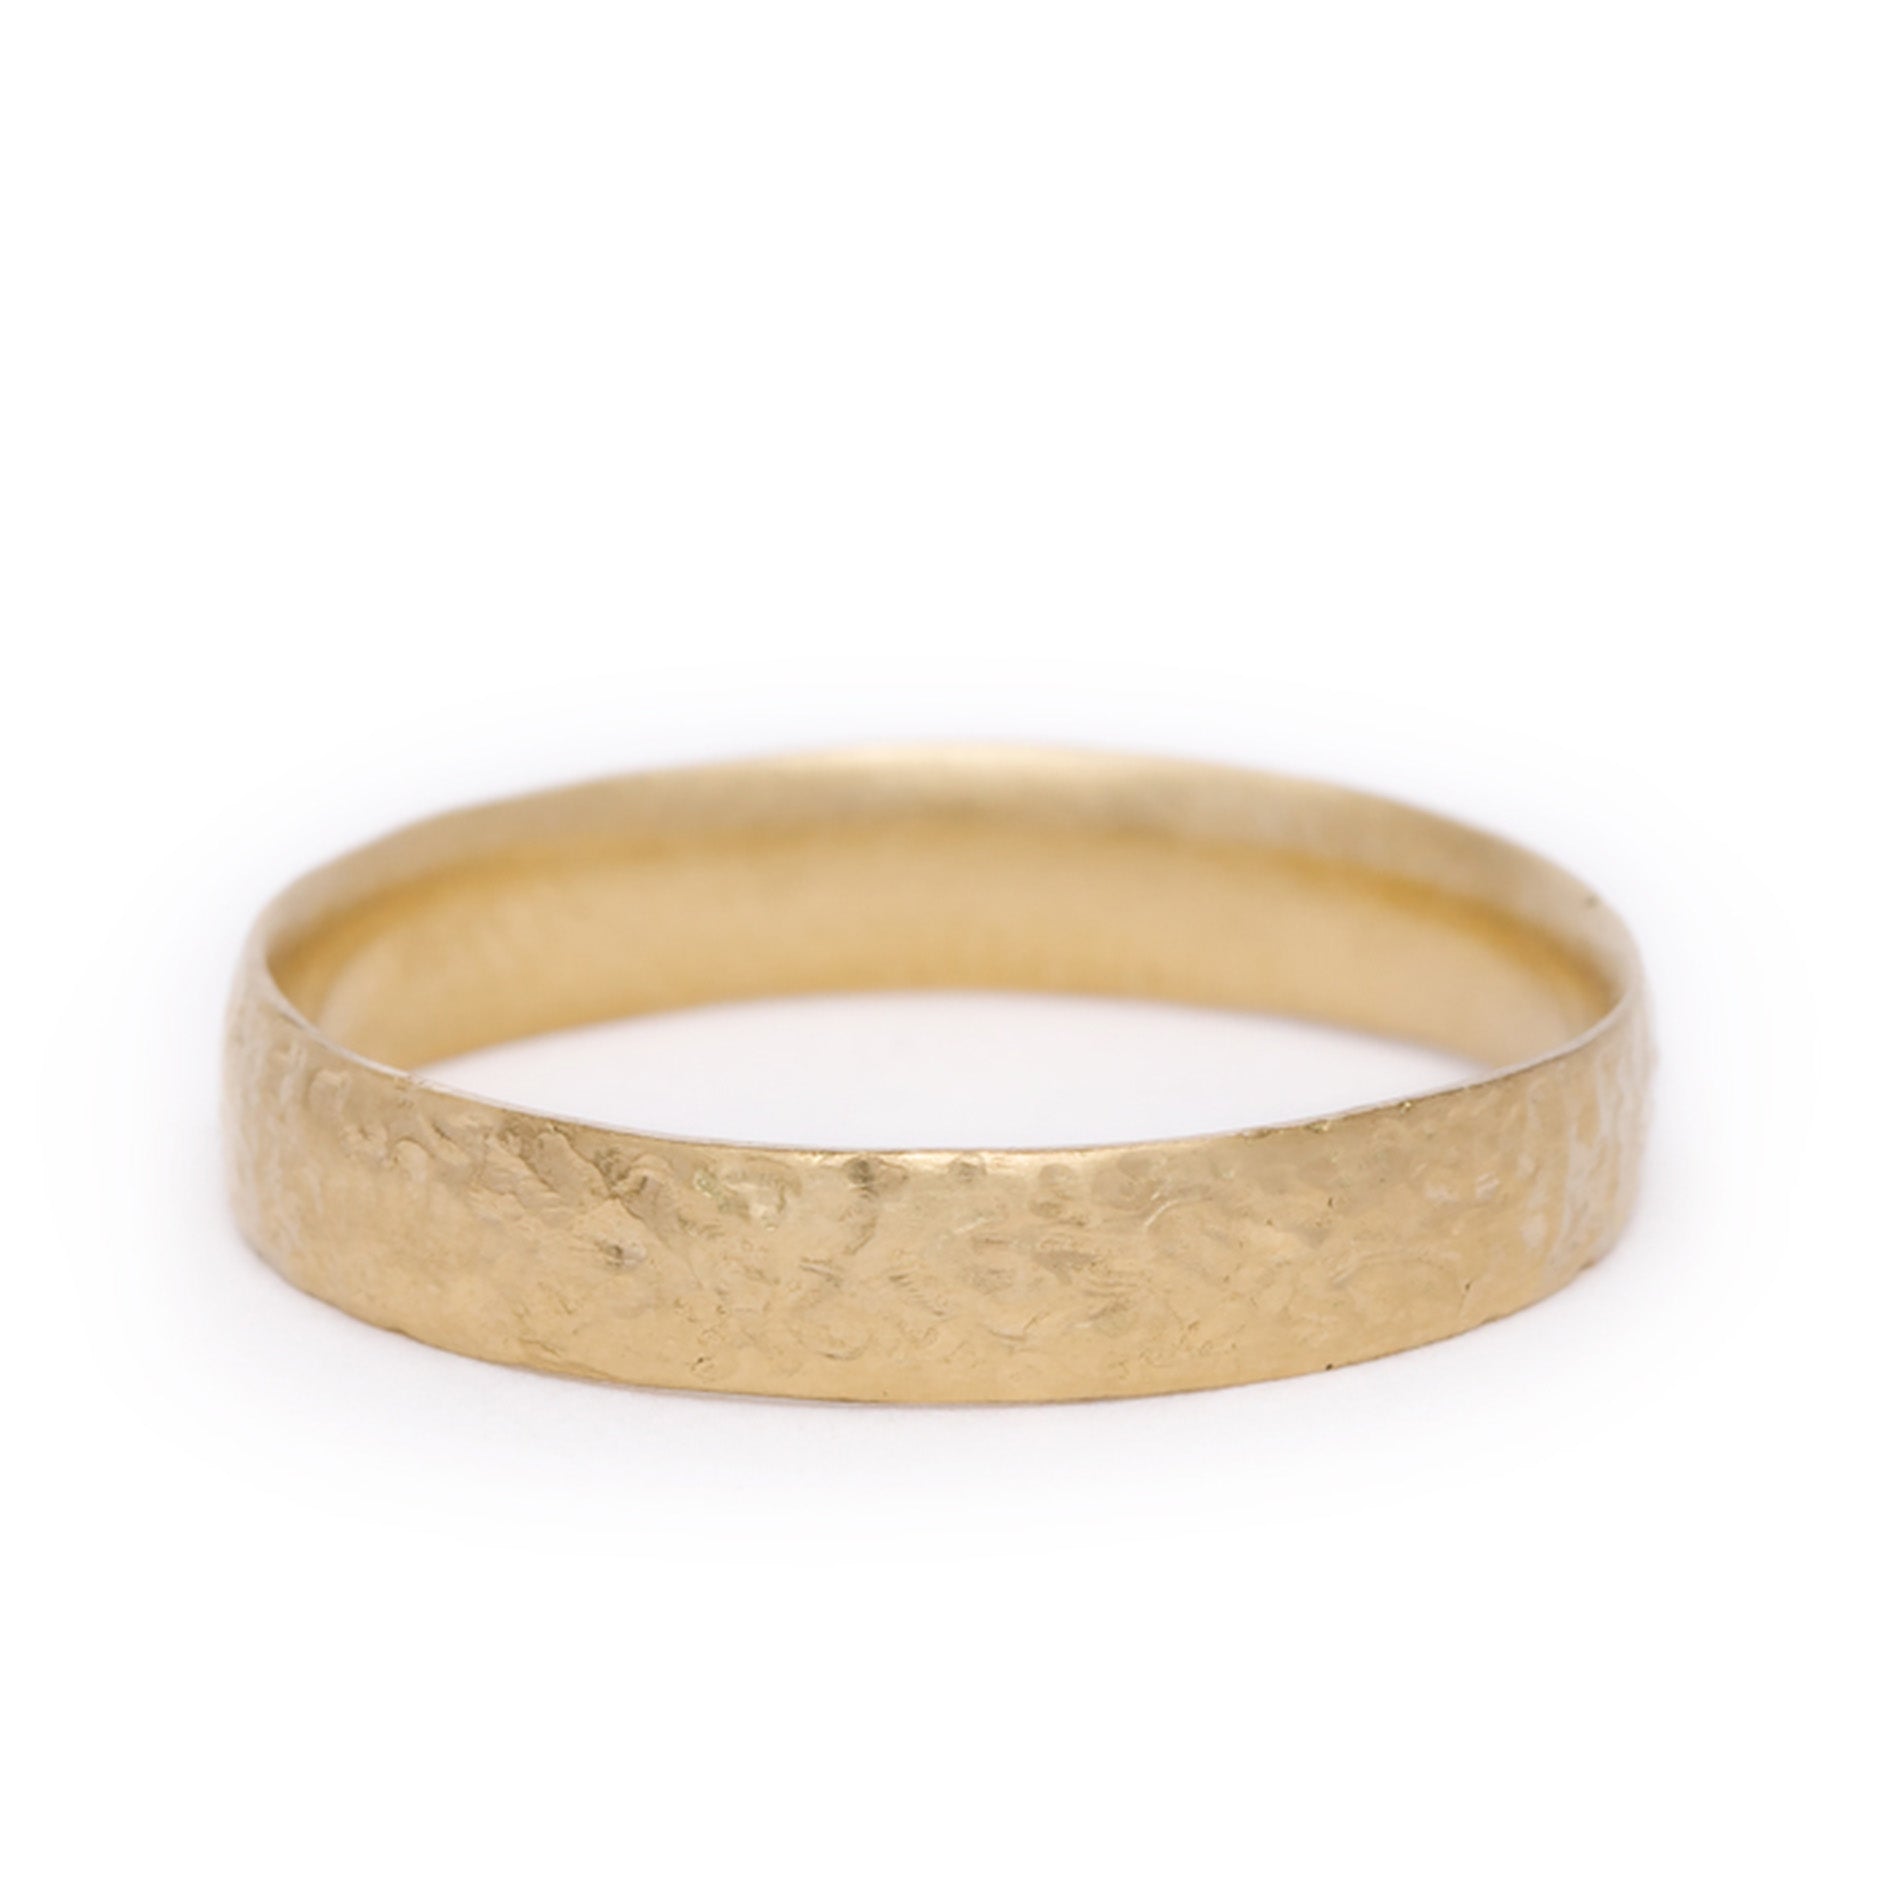 Scattered Gold Wedding Ring 4mm